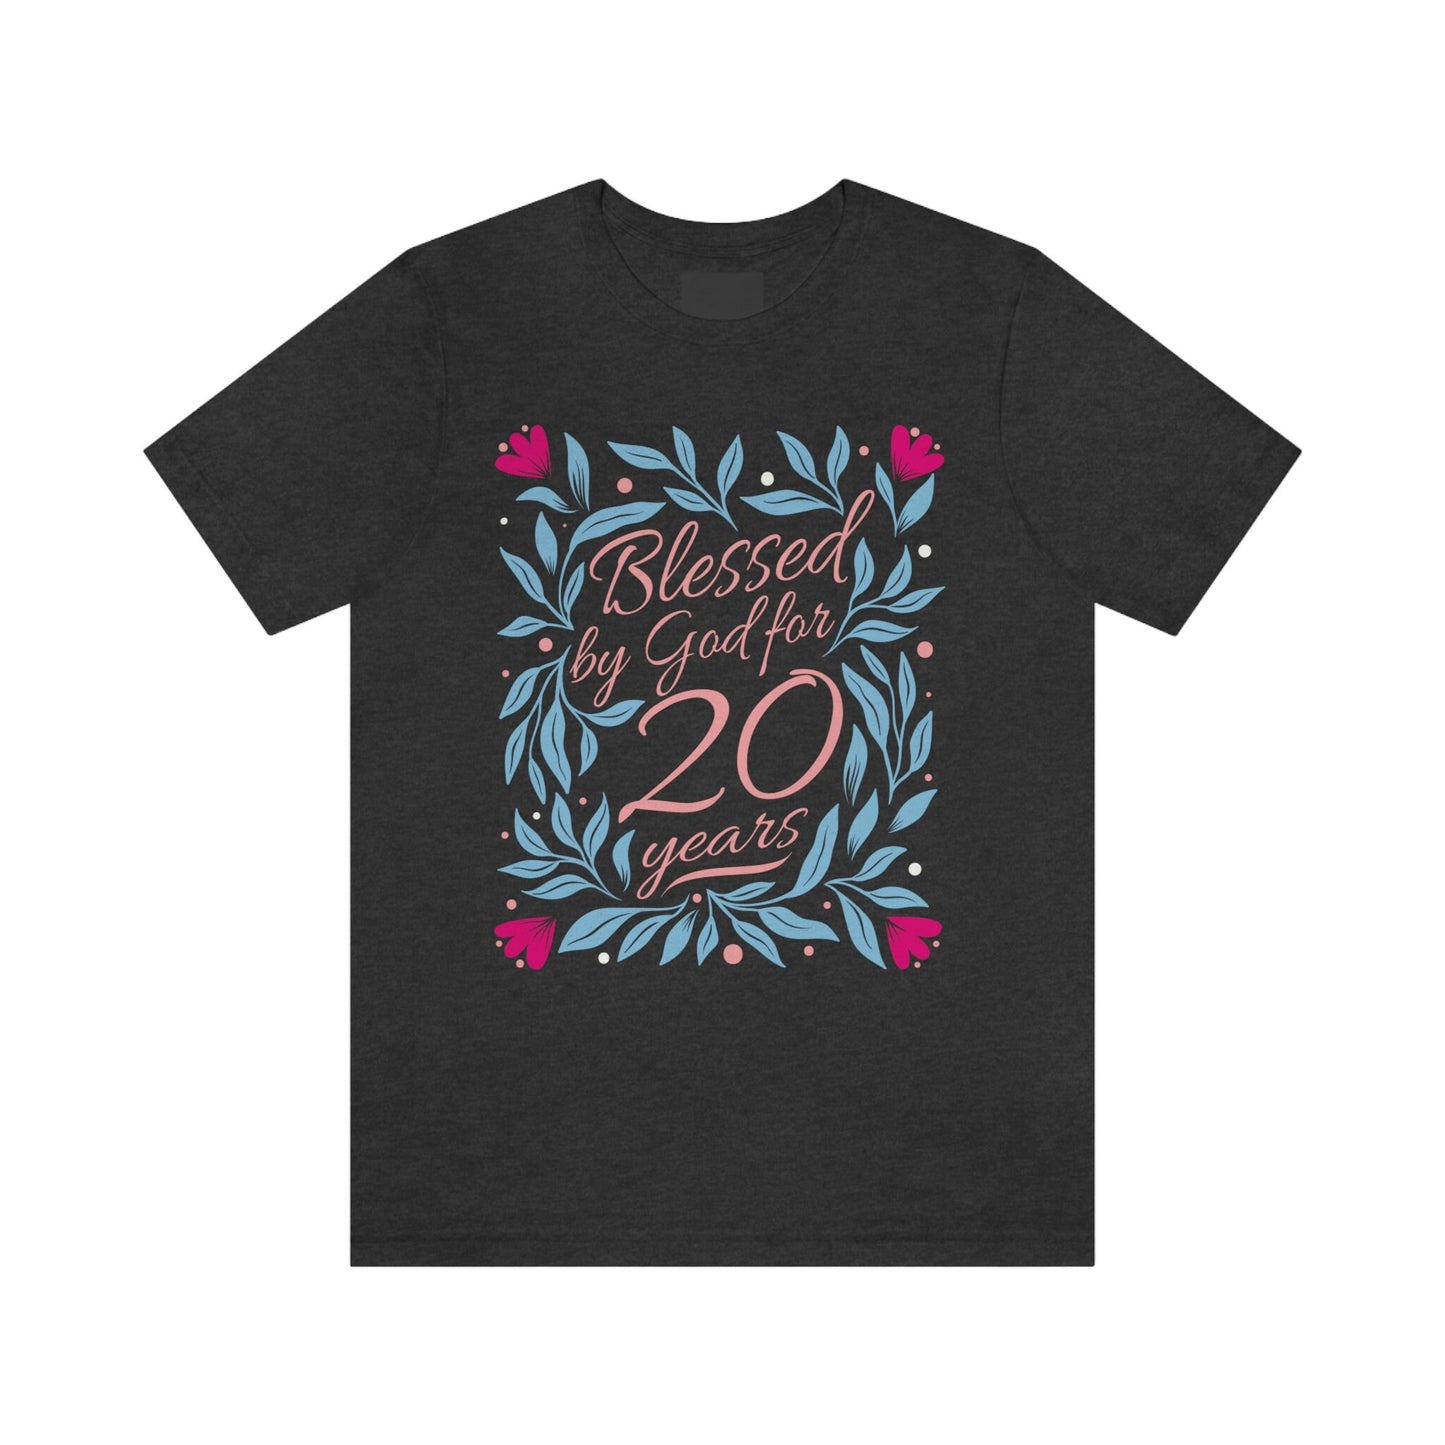 Blessed by God for 20 years gift t-shirt for daughter or niece